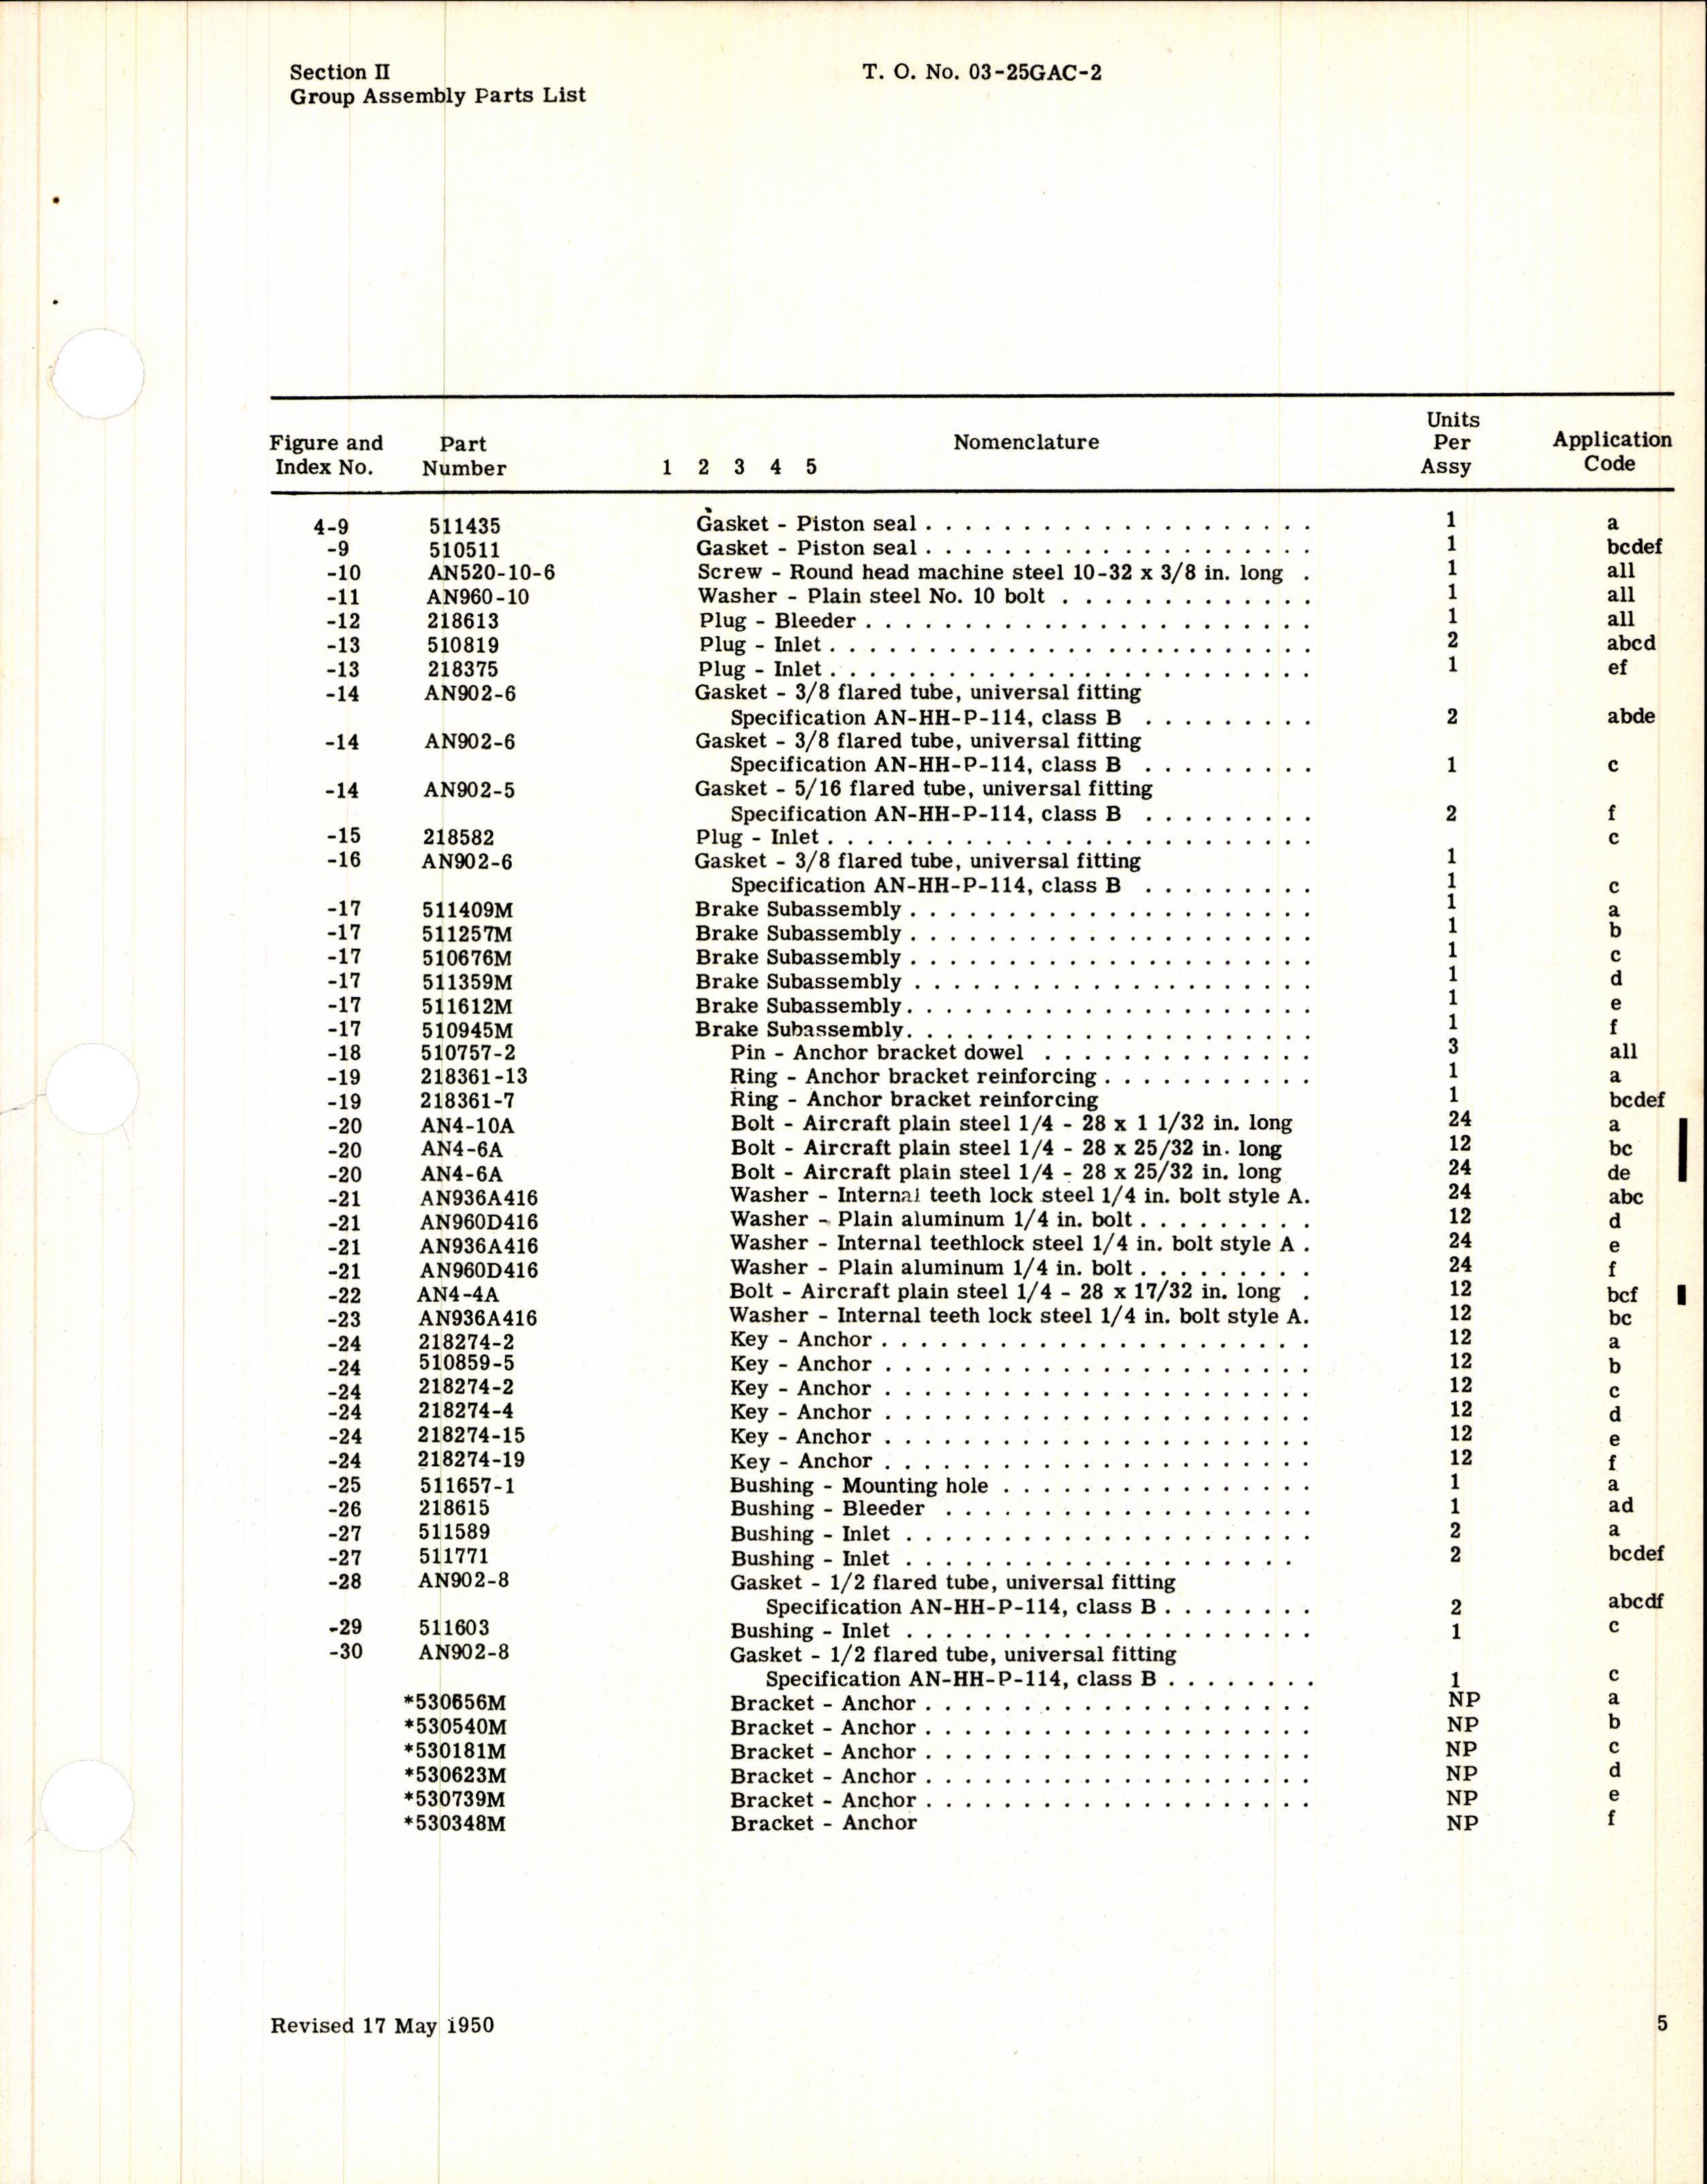 Sample page 9 from AirCorps Library document: Parts Catalog  for Multiple Disk Brakes (Goodyear)